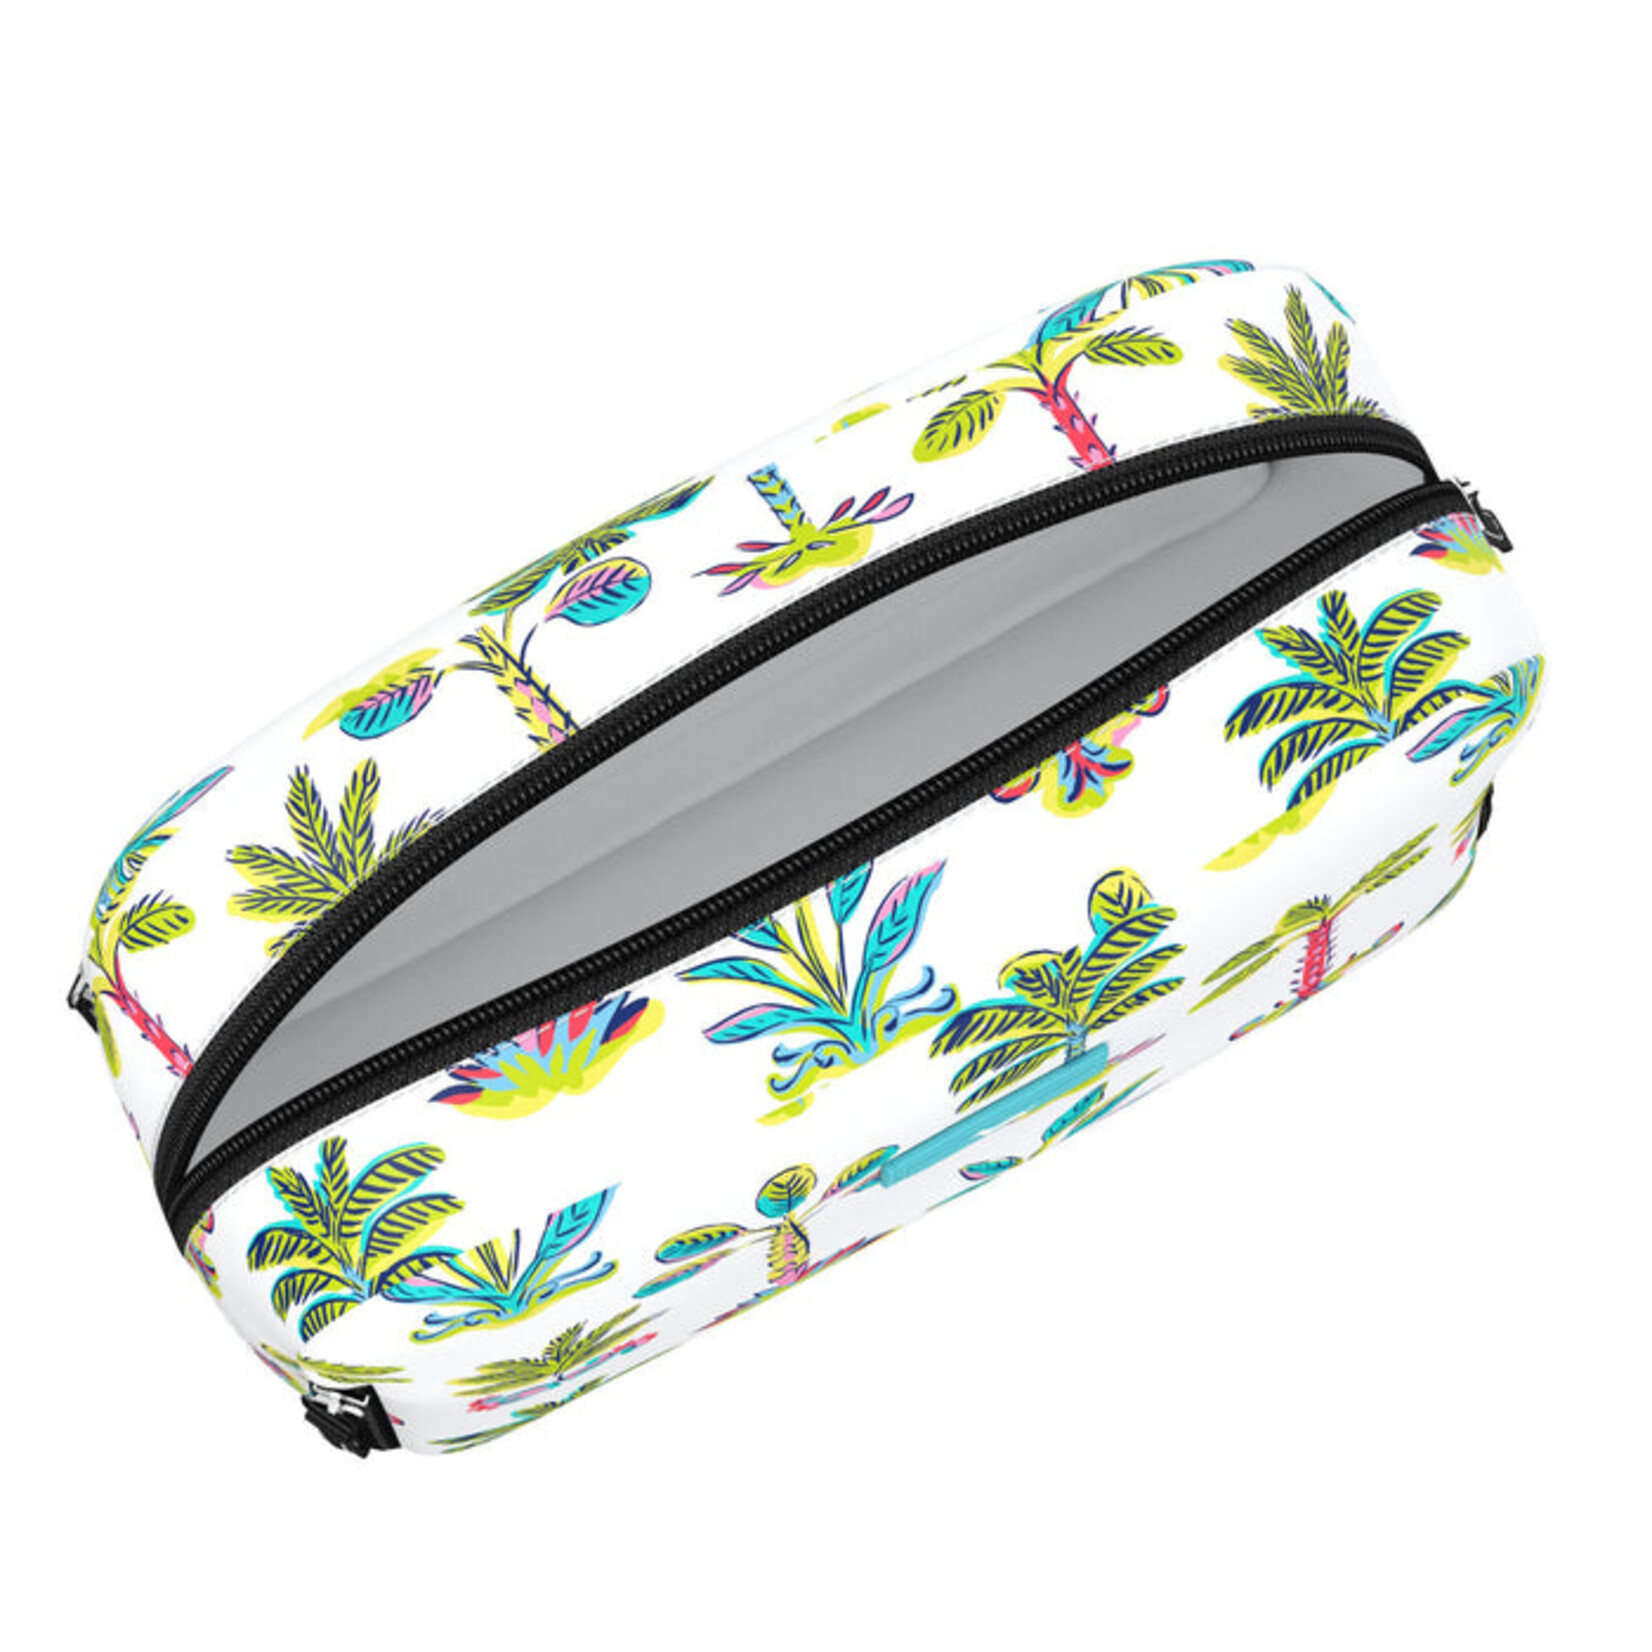 Scout Scout 3 Way Bag-Hot Tropic